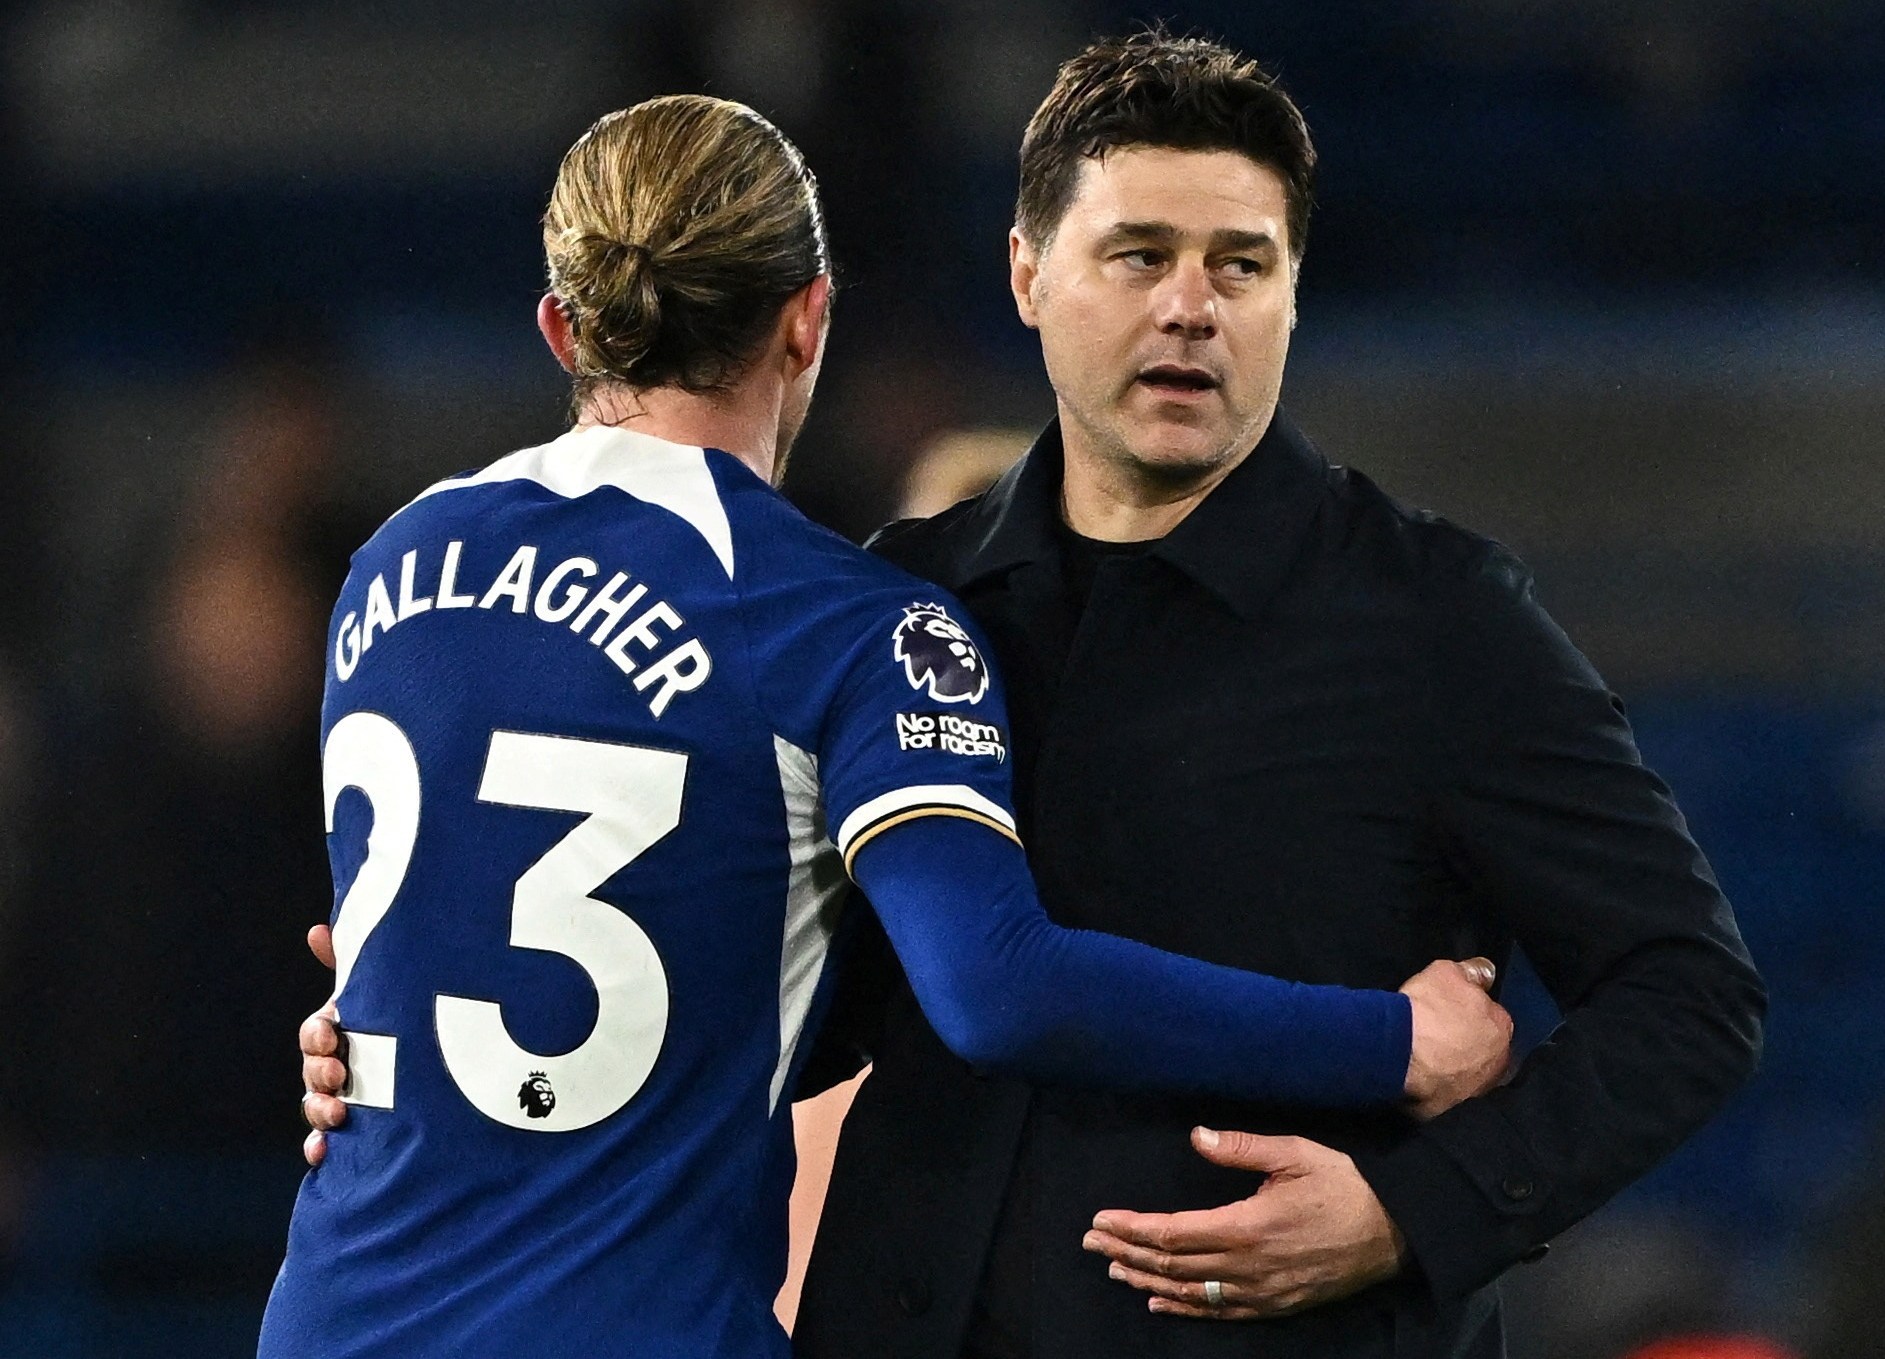 Pochettino’s Chelsea have lost only one of their past 11 games